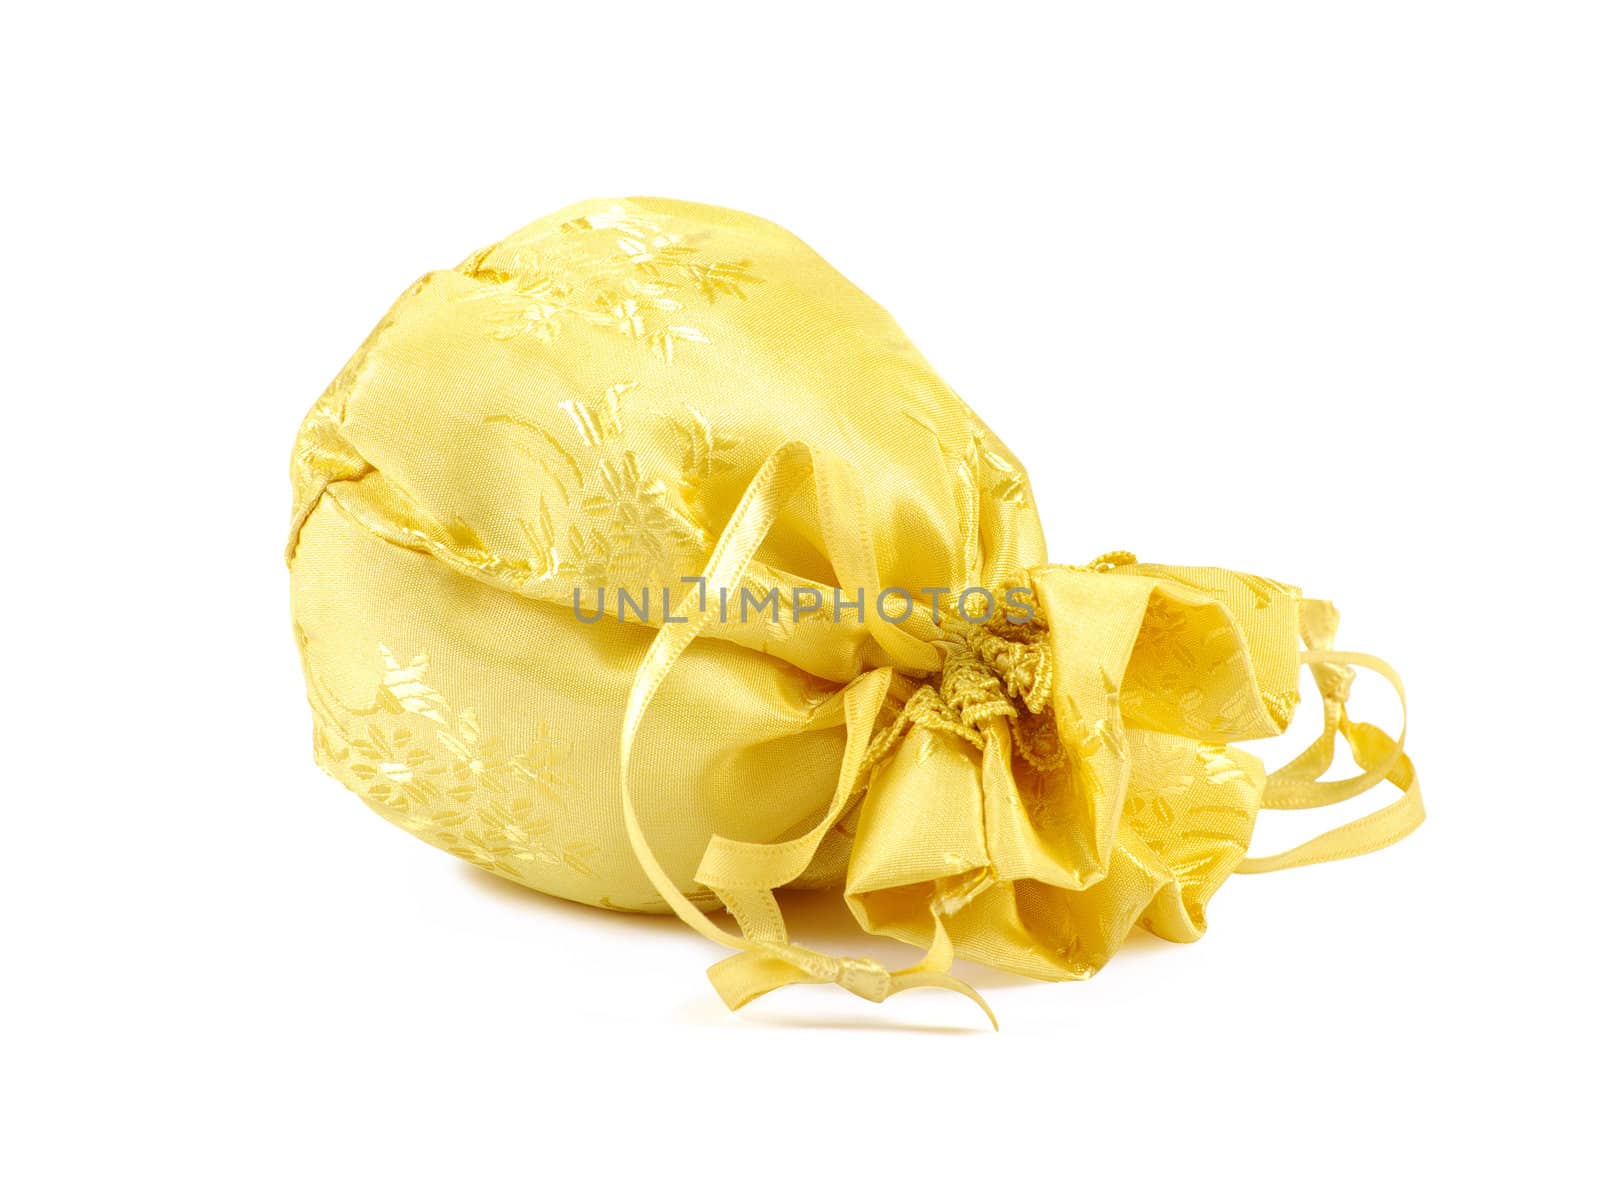 bag of gifts isolated on a white background. Studio photography